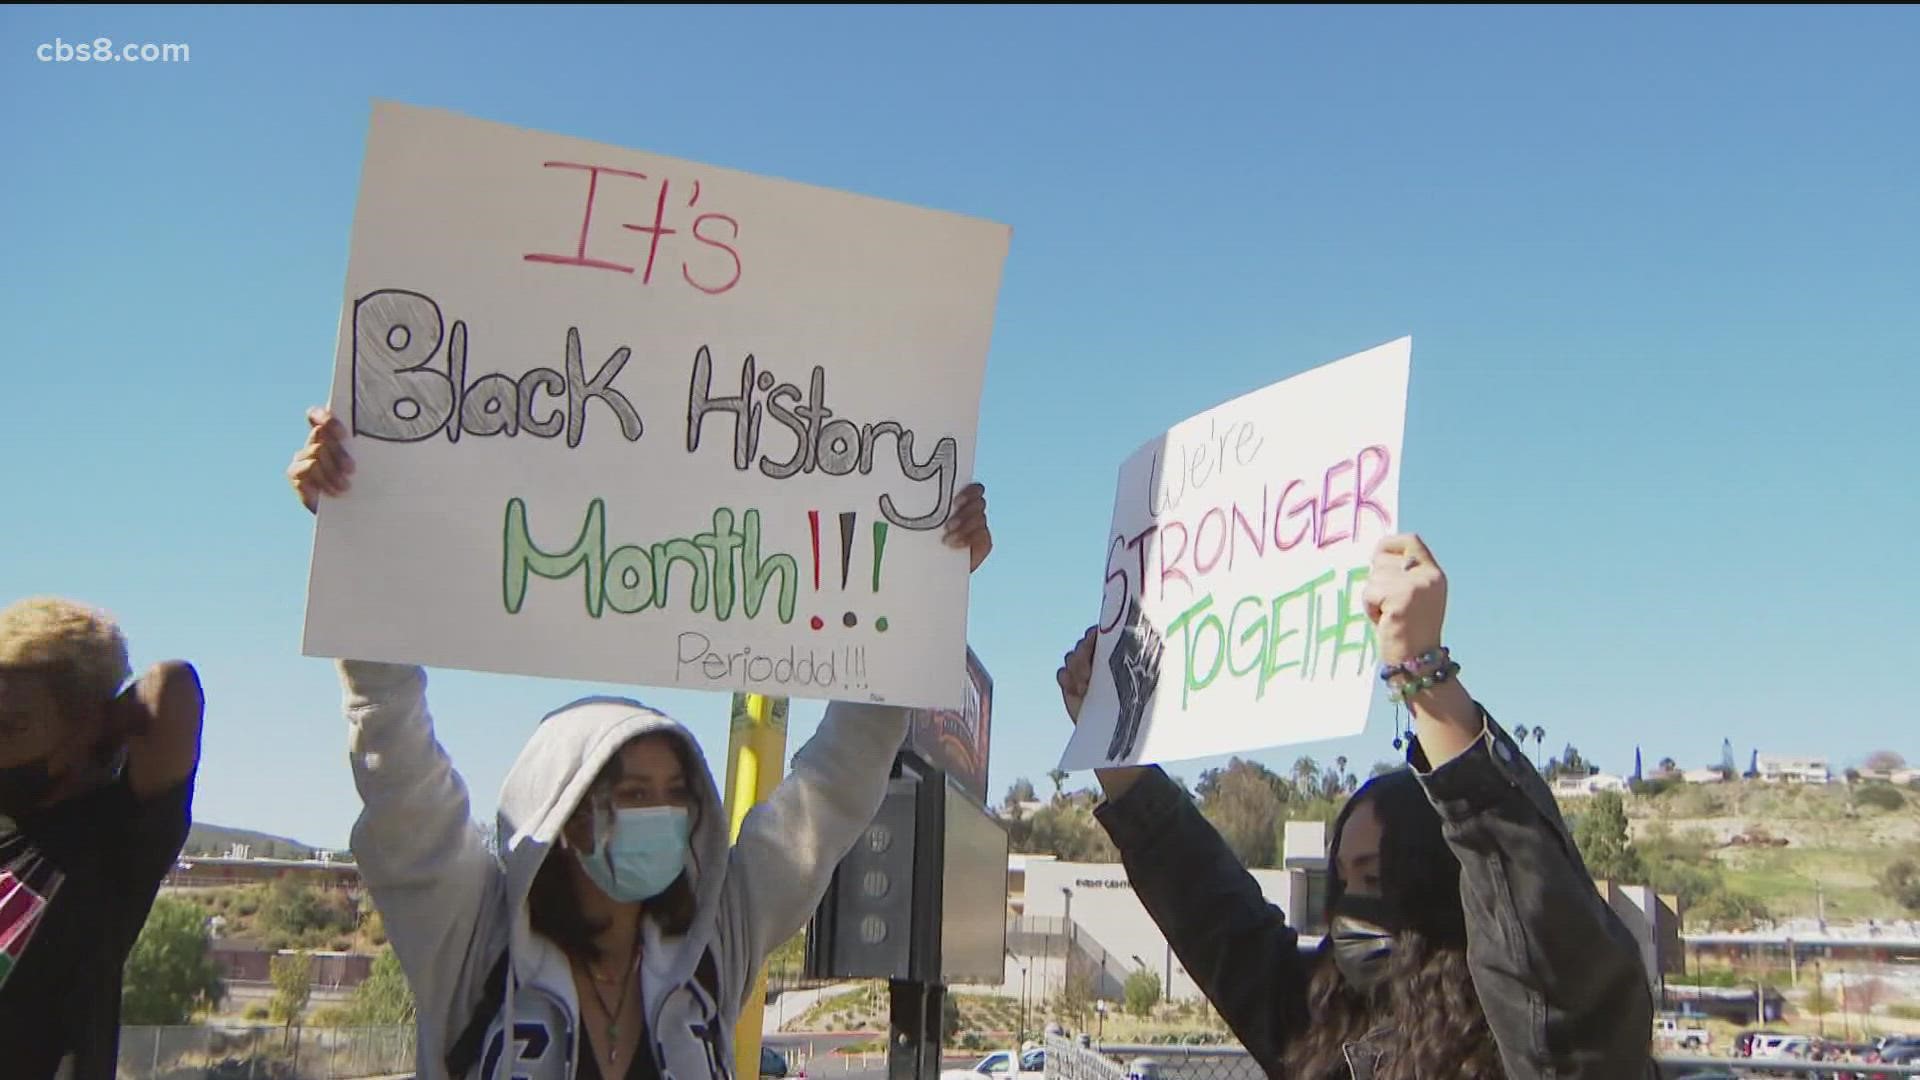 Students in Spring Valley walked out of class to call attention to what they say is a lack of Black History Month lessons or celebrations at Monte Vista High School